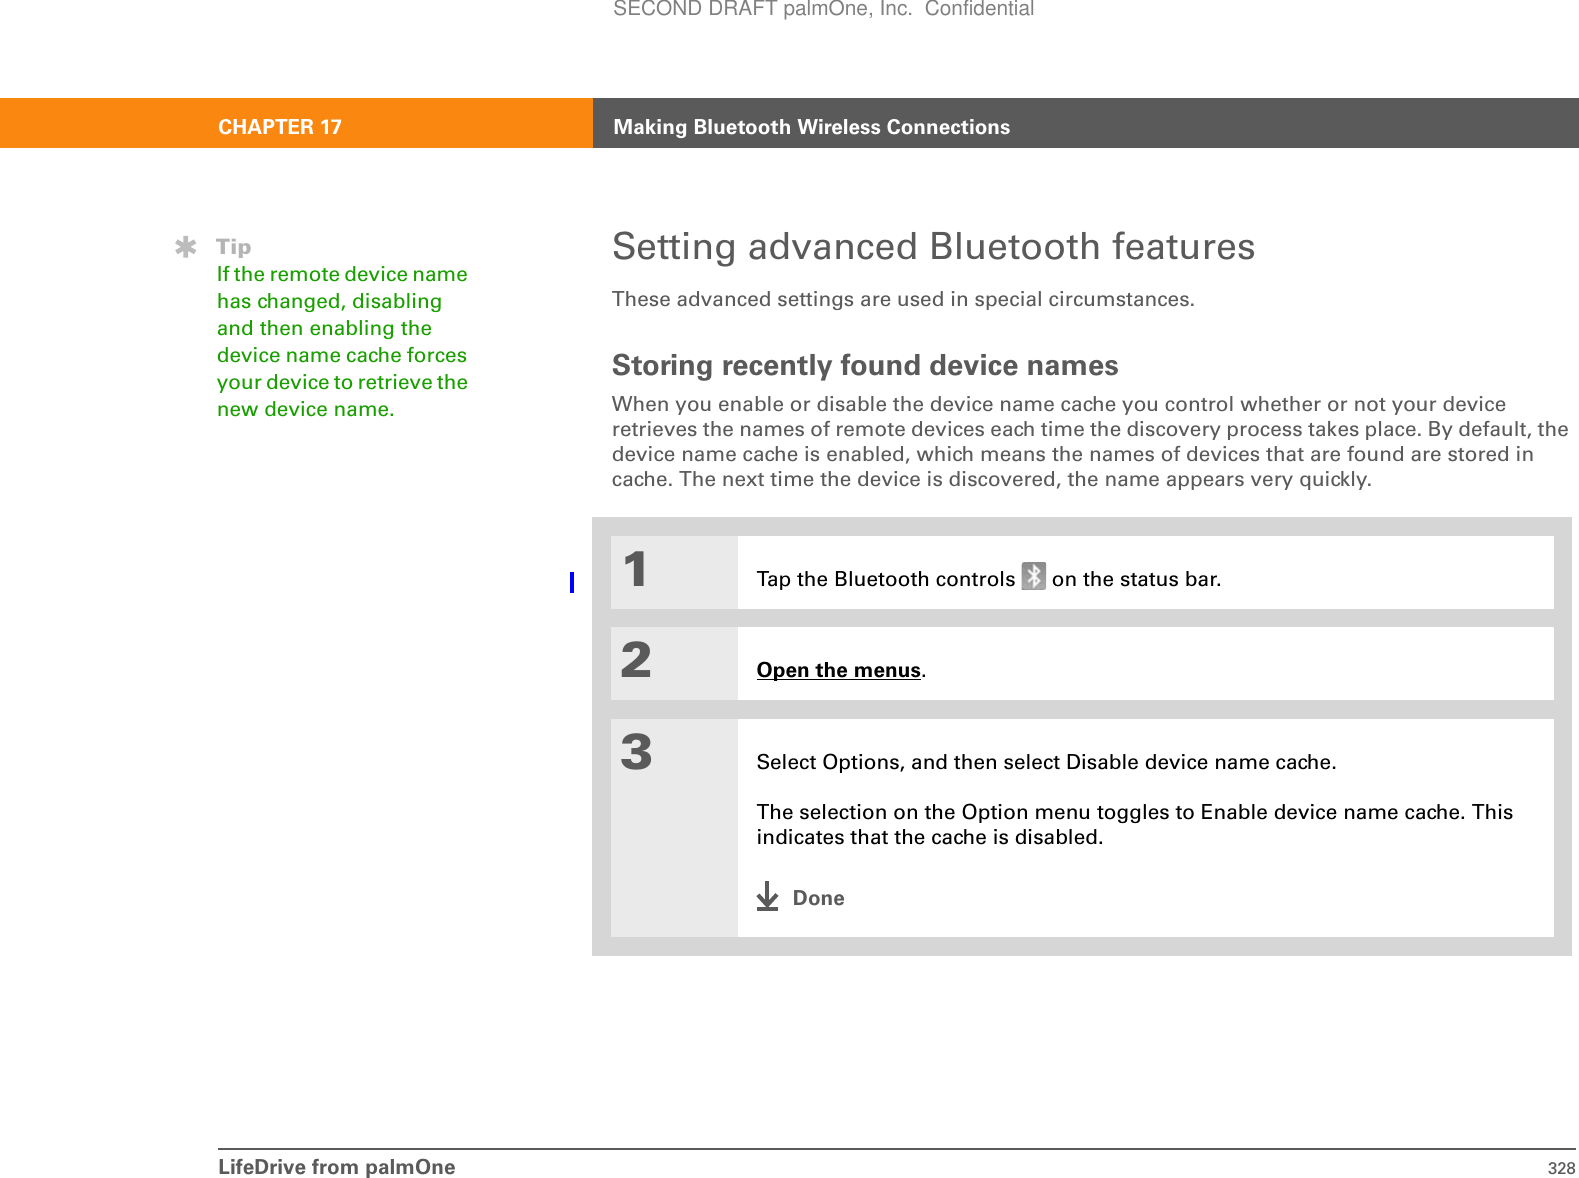 LifeDrive from palmOne 328CHAPTER 17 Making Bluetooth Wireless ConnectionsSetting advanced Bluetooth featuresThese advanced settings are used in special circumstances.Storing recently found device namesWhen you enable or disable the device name cache you control whether or not your device retrieves the names of remote devices each time the discovery process takes place. By default, the device name cache is enabled, which means the names of devices that are found are stored in cache. The next time the device is discovered, the name appears very quickly.01Tap the Bluetooth controls   on the status bar.2Open the menus.3Select Options, and then select Disable device name cache. The selection on the Option menu toggles to Enable device name cache. This indicates that the cache is disabled.DoneTipIf the remote device name has changed, disabling and then enabling the device name cache forces your device to retrieve the new device name.SECOND DRAFT palmOne, Inc.  Confidential